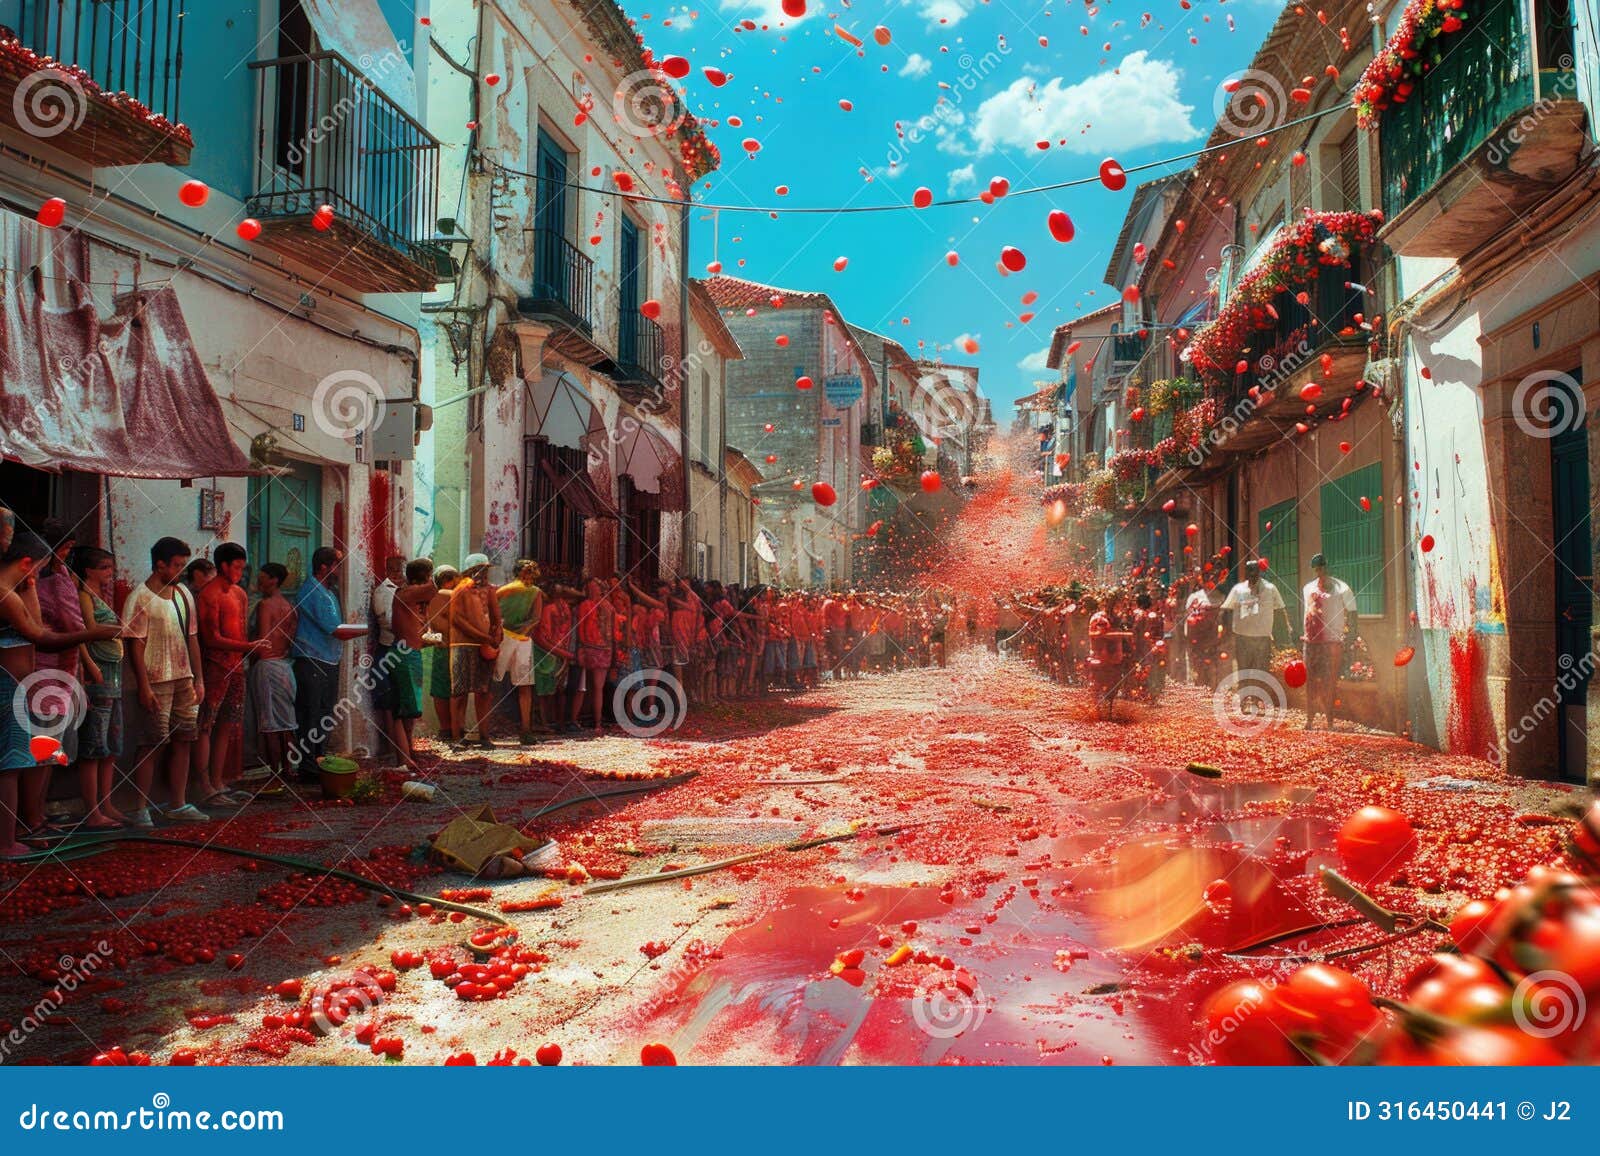 la tomatina festival in bunyol, spain with participants engaging in a vibrant tomato fight